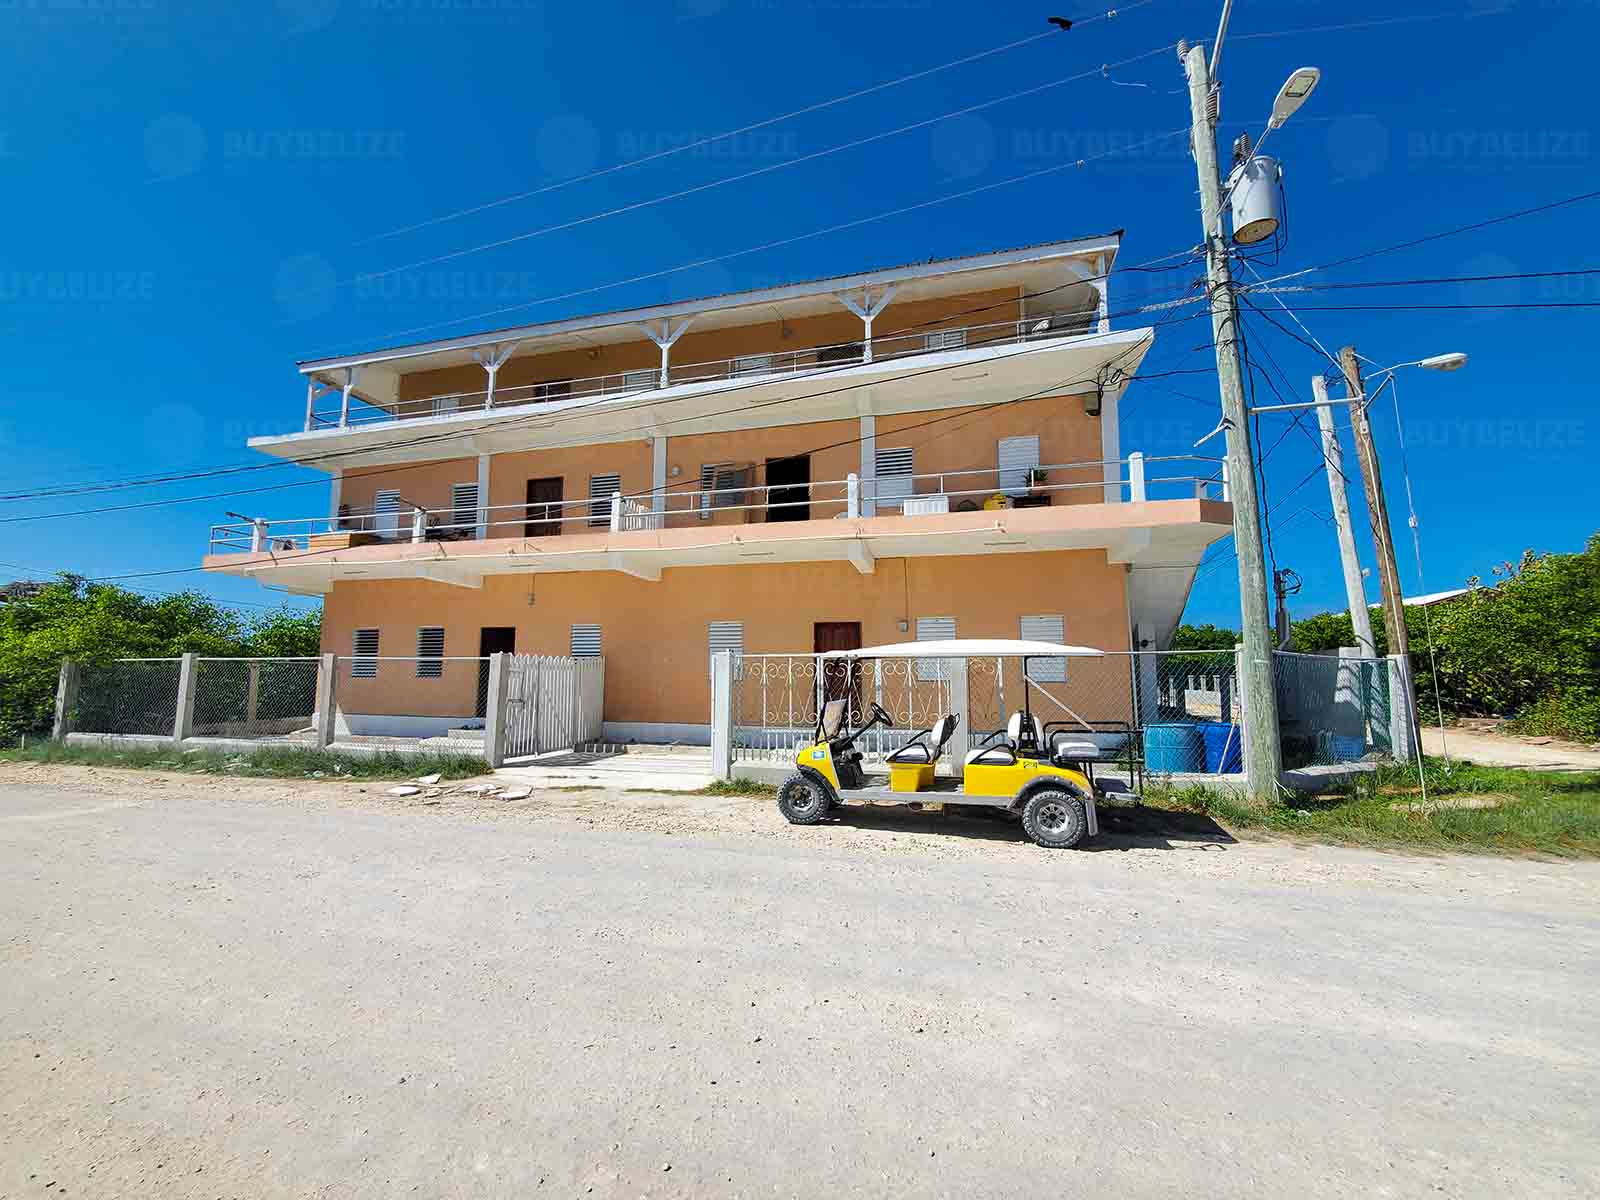 Apartment complex for sale in Caye Caulker